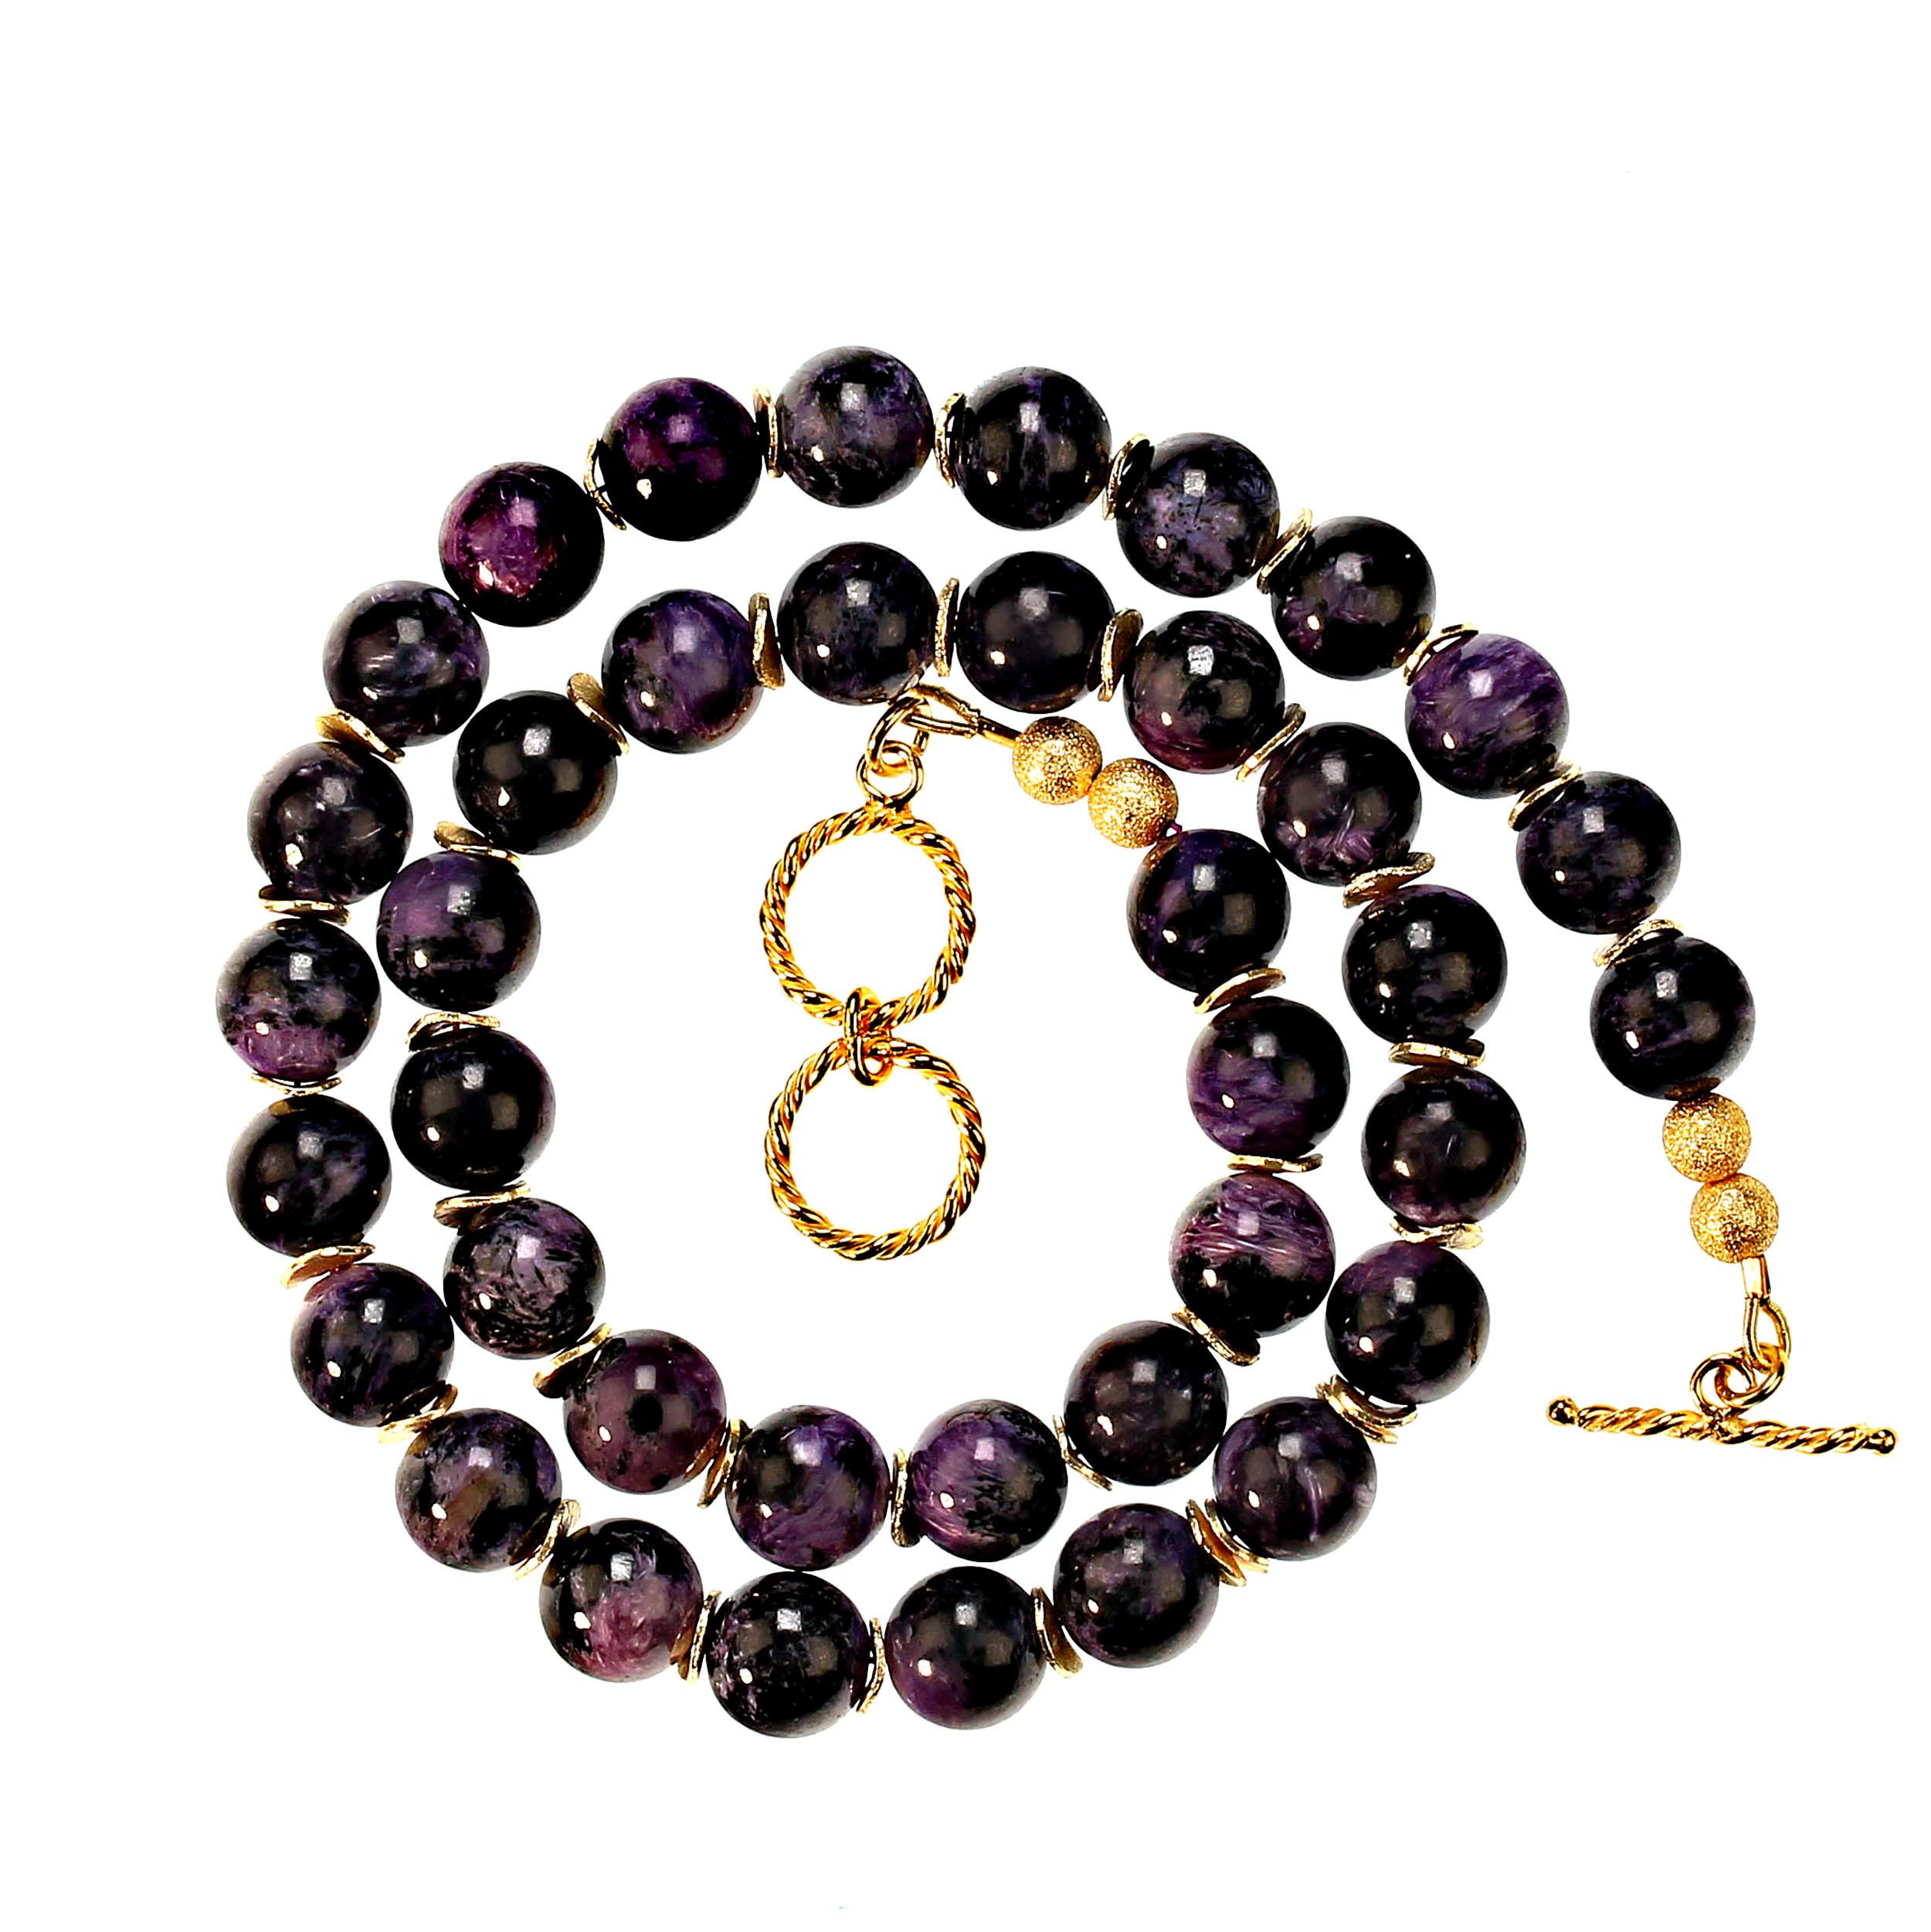 Bead  Purple Charoite Necklace with Goldy Accents  Perfect Gift! For Sale